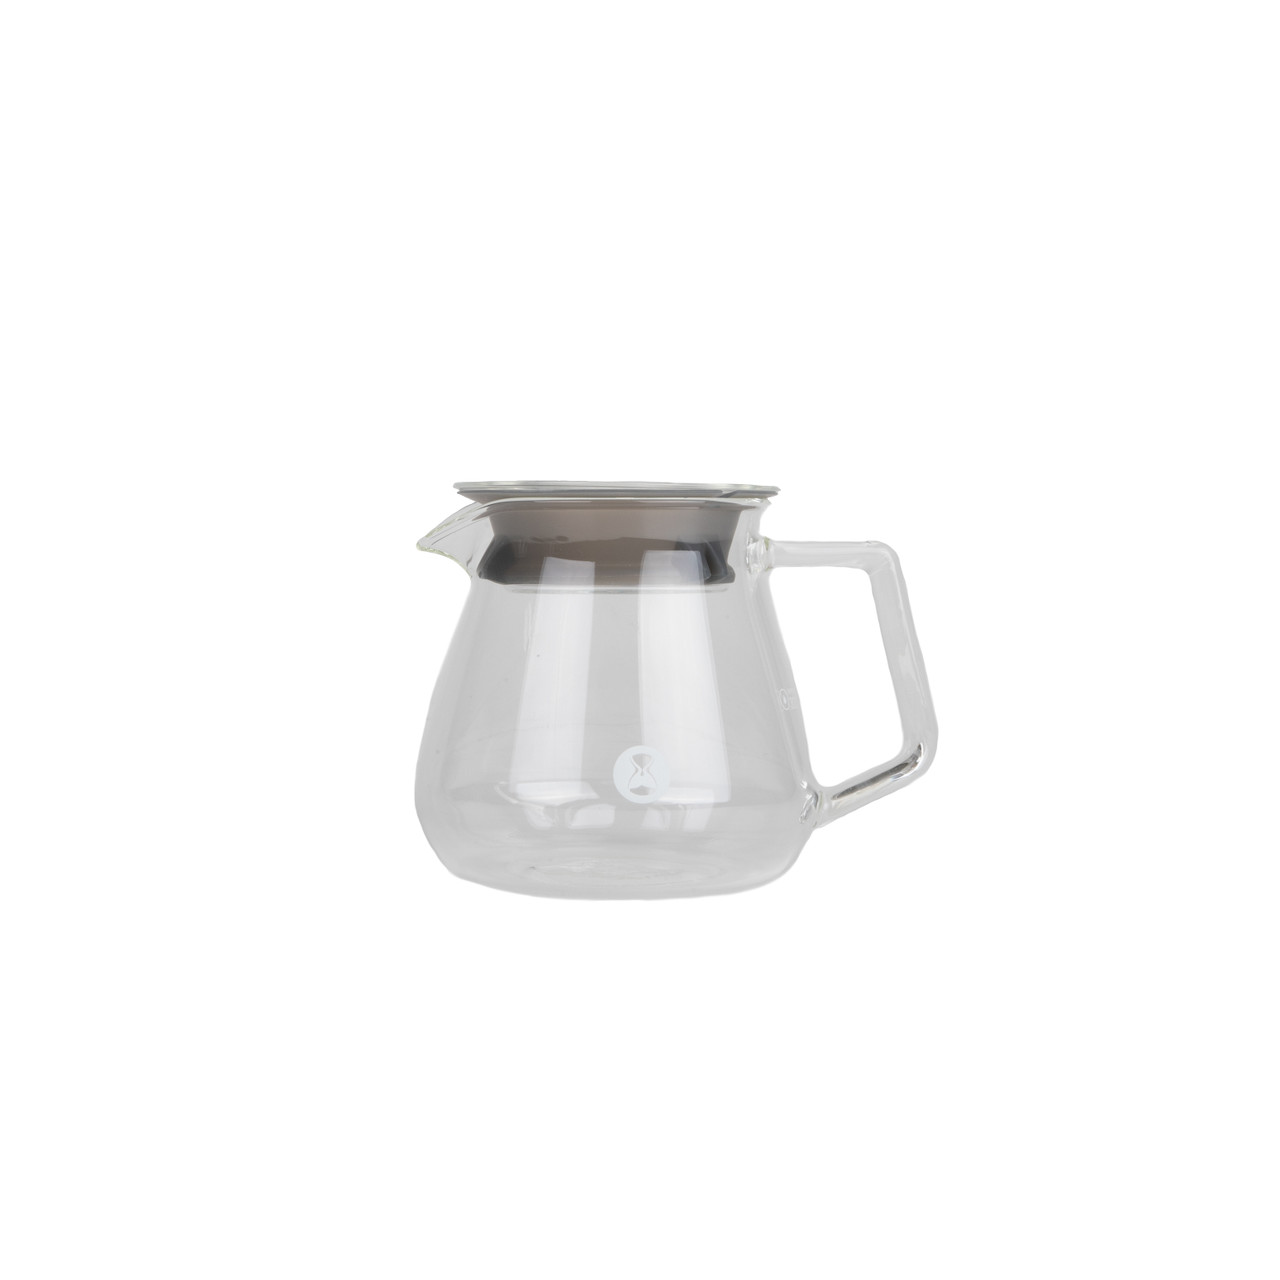 https://cdn11.bigcommerce.com/s-6h7ychjk4/products/11085/images/94405/Timemore_Glass_Coffee_Server_WBG_20220921-2__58647.1663866802.1280.1280.jpg?c=1